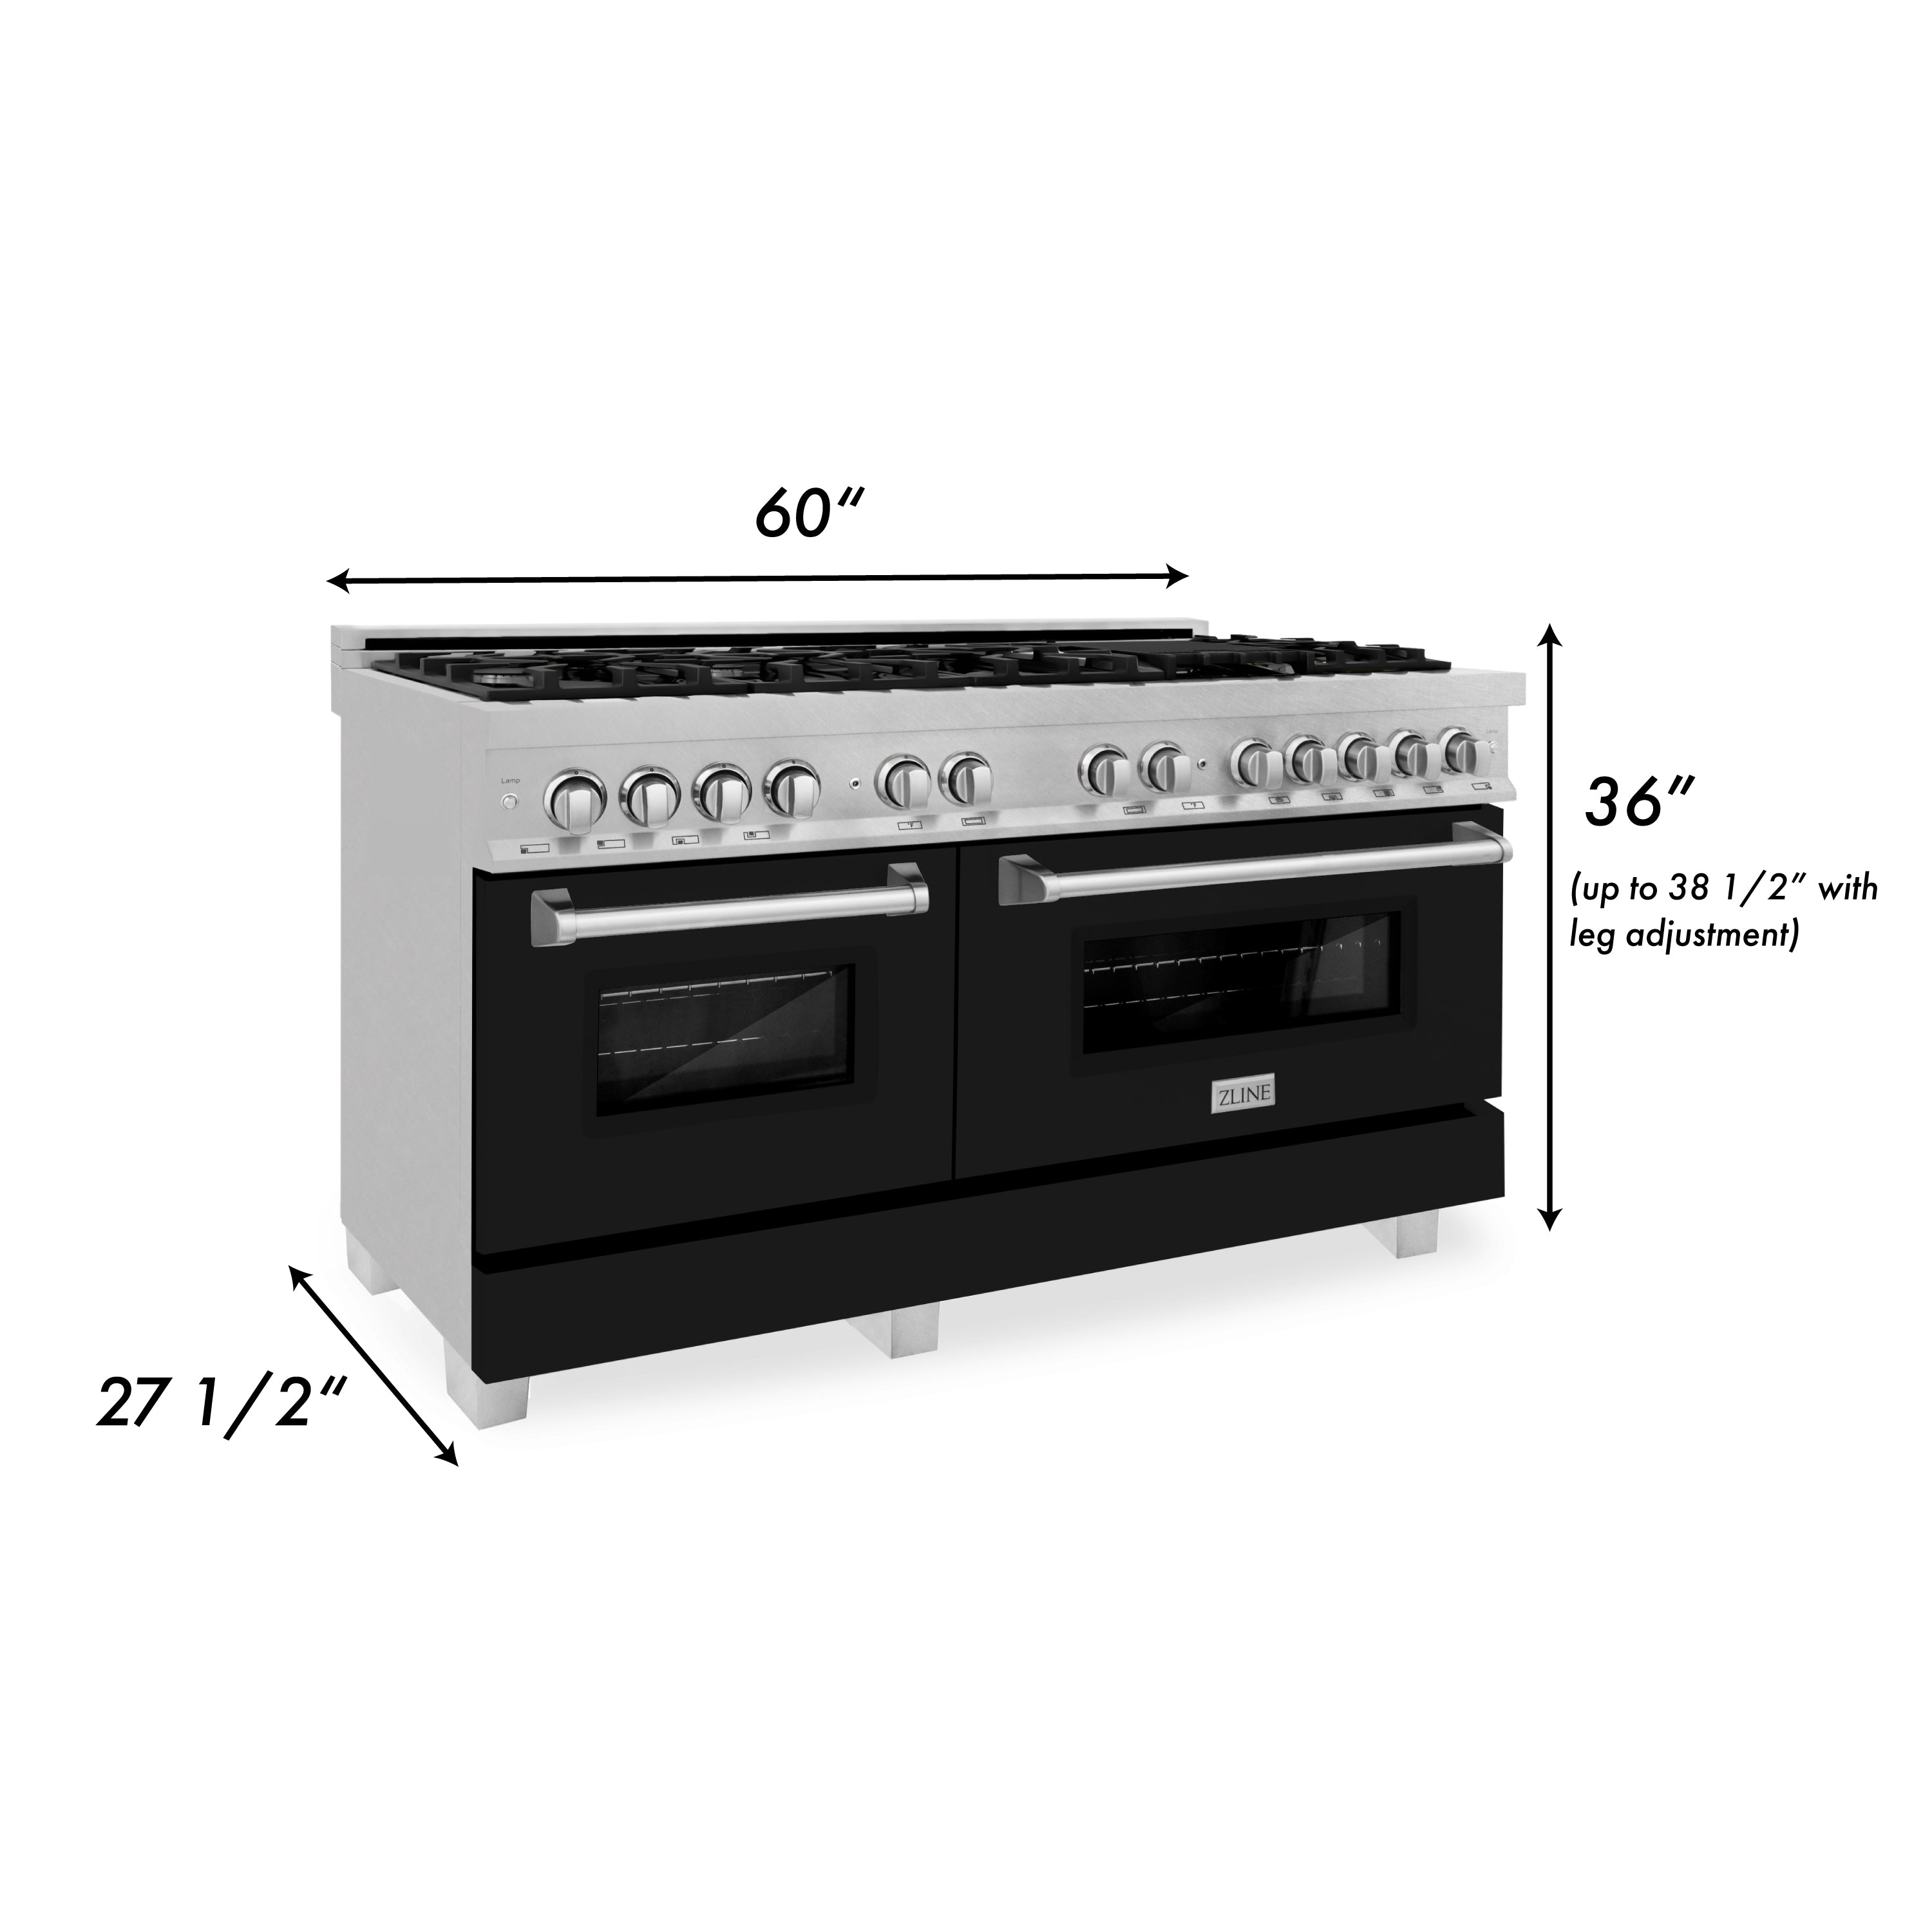 ZLINE 60 In. Professional Dual Fuel Range in DuraSnow® Stainless Steel with Black Matte Doors (RAS-BLM-60) dimensional diagram with measurements.